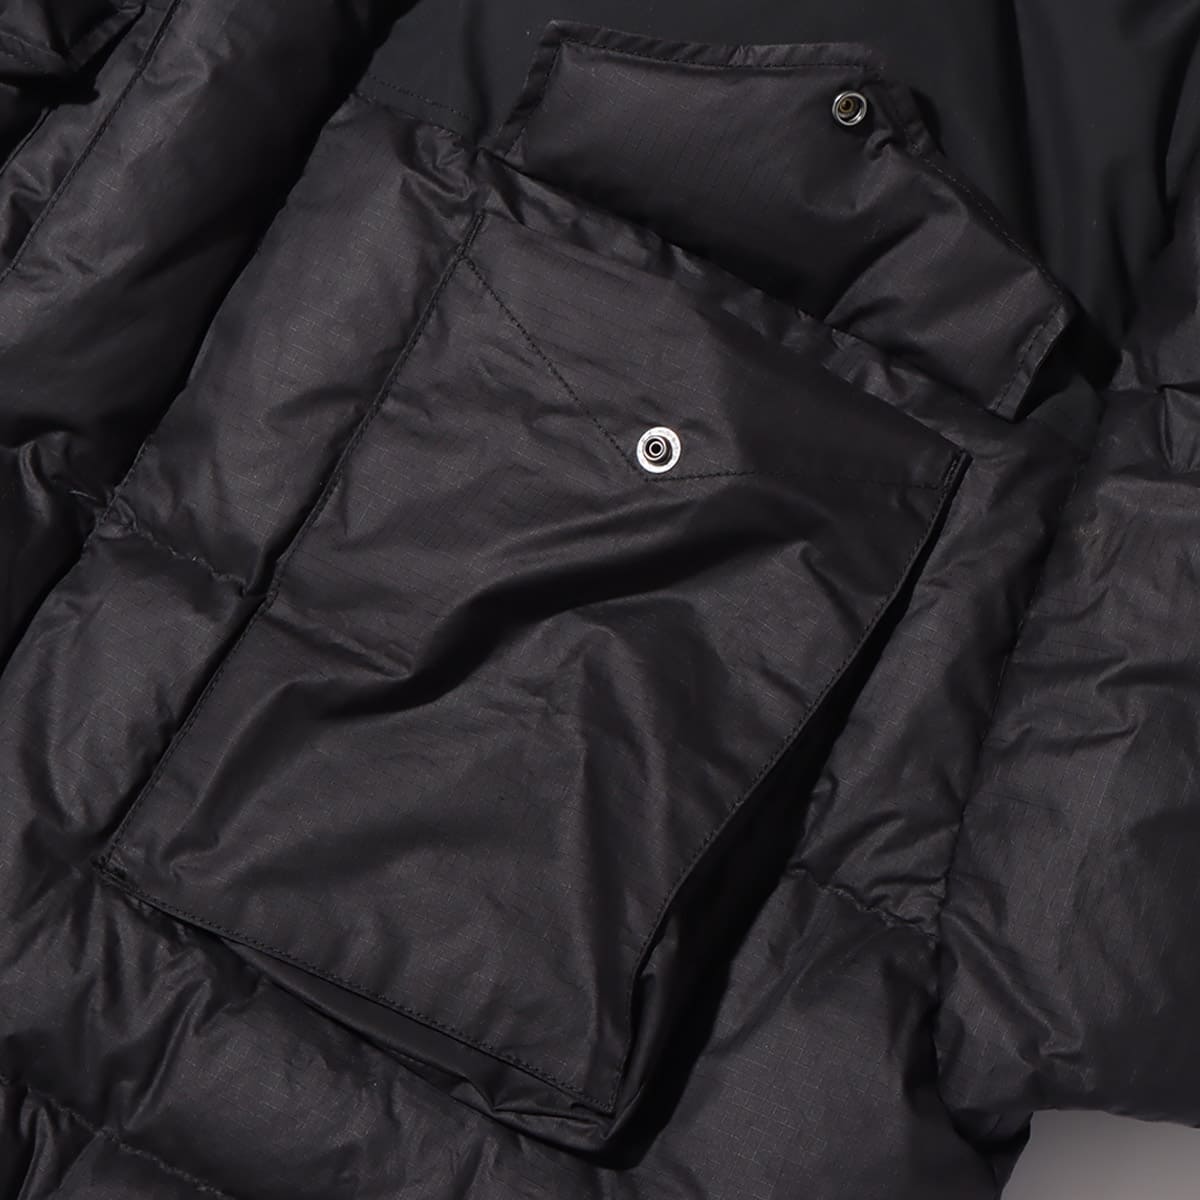 THE NORTH FACE PURPLE LABEL Field Down Jacket Black